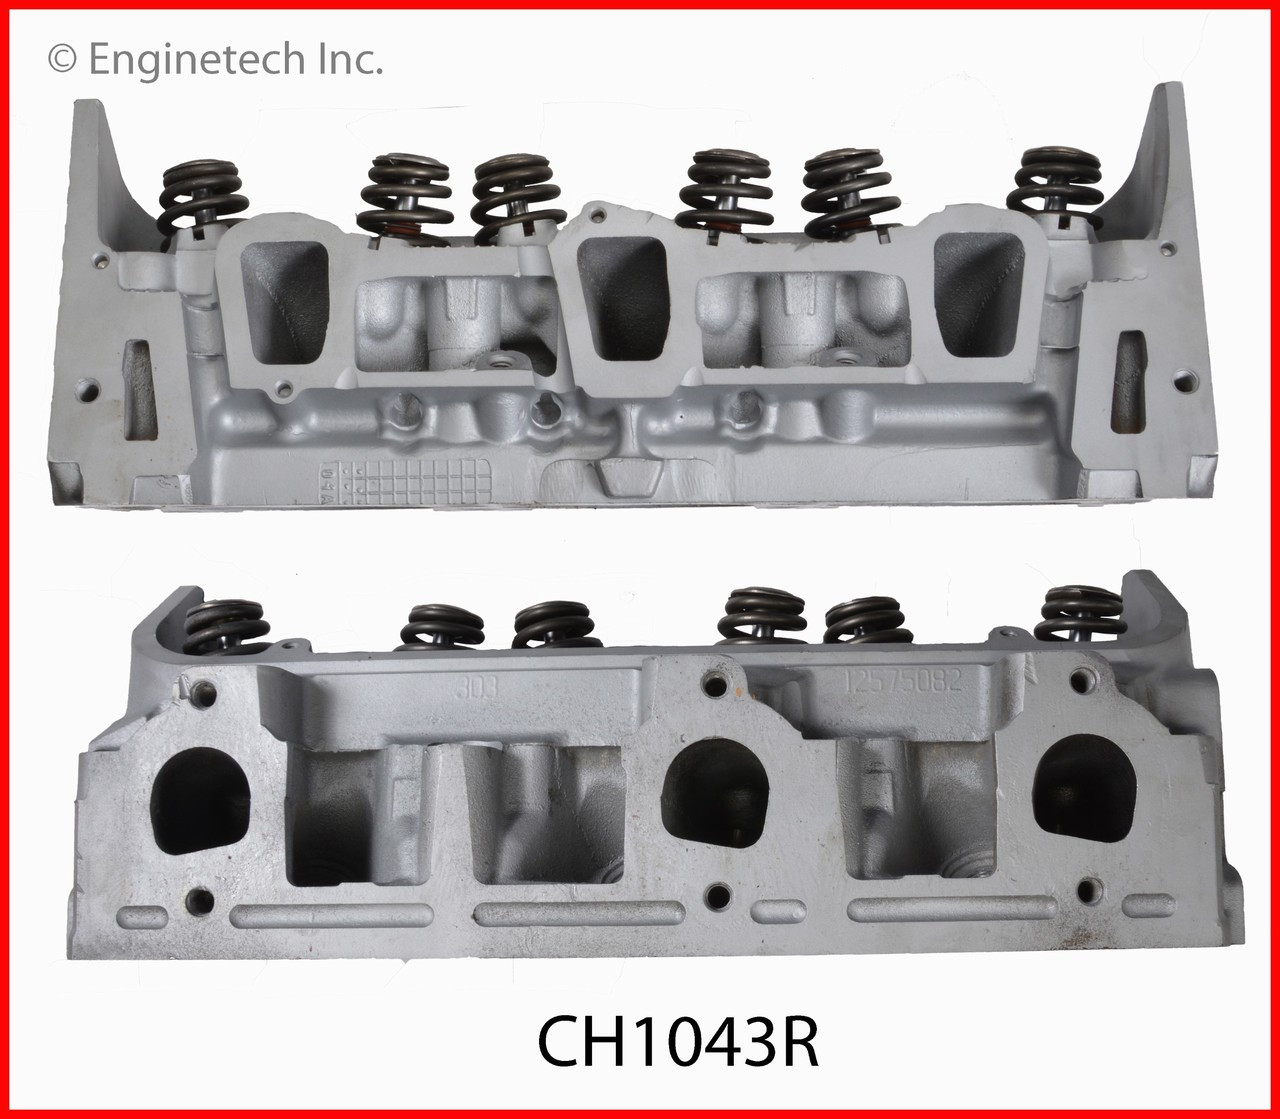 2009 Chevrolet Equinox 3.4L Engine Cylinder Head Assembly CH1043R -12